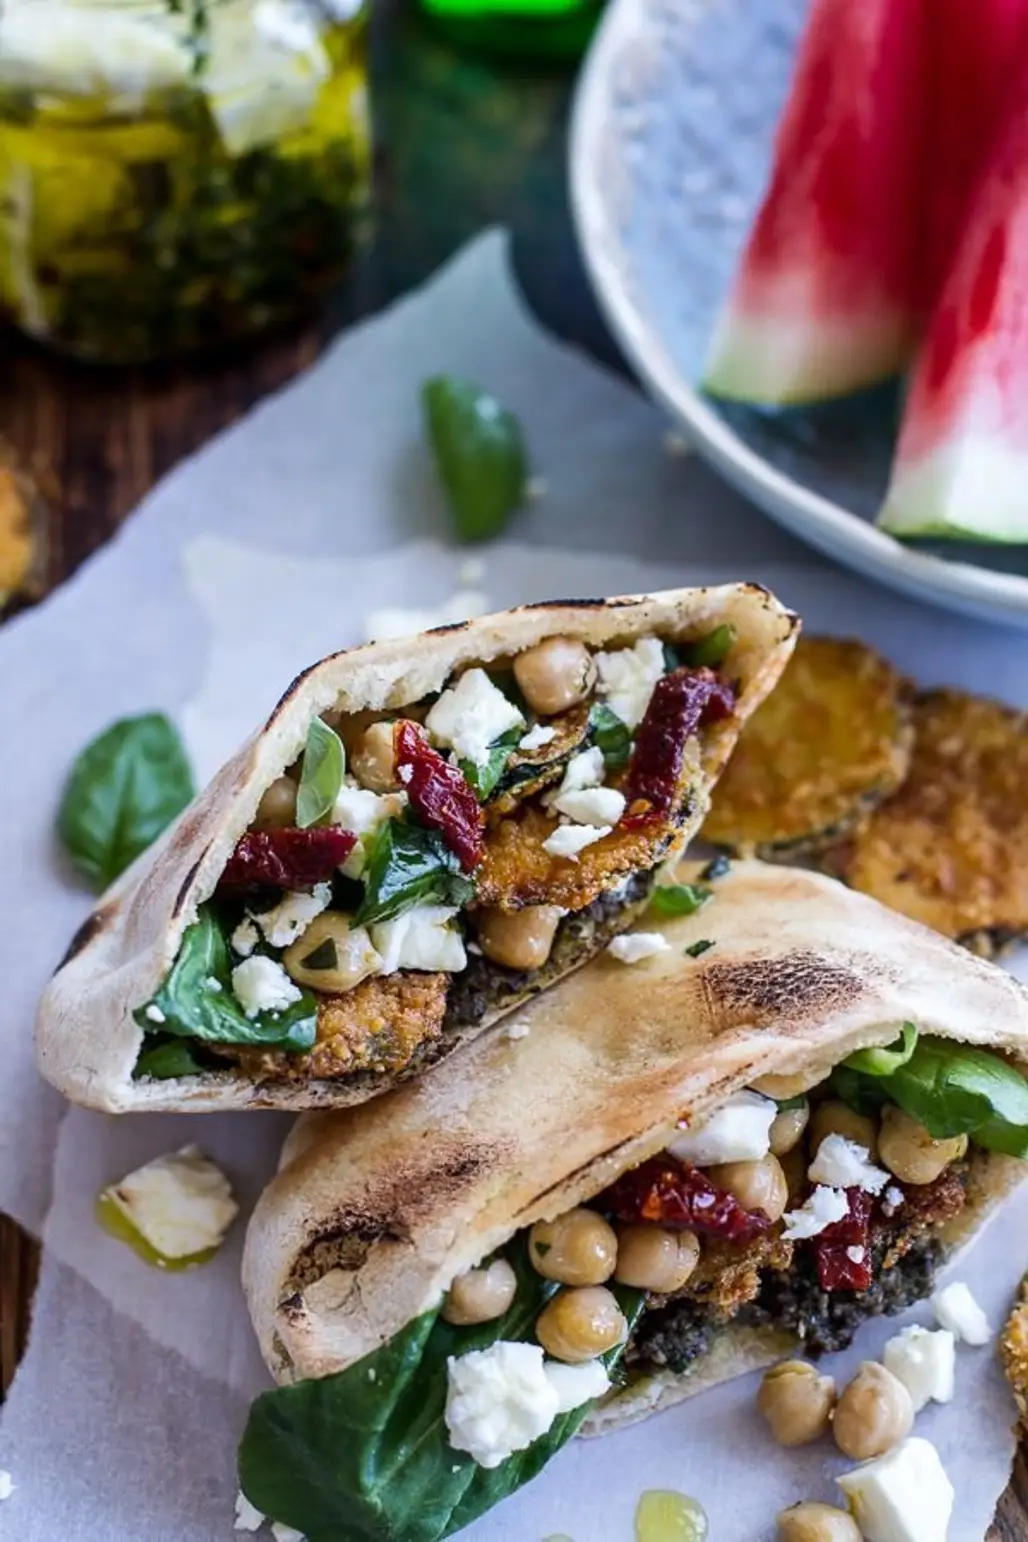 Greek Olive Pesto and Fried Zucchini Grilled Pitas